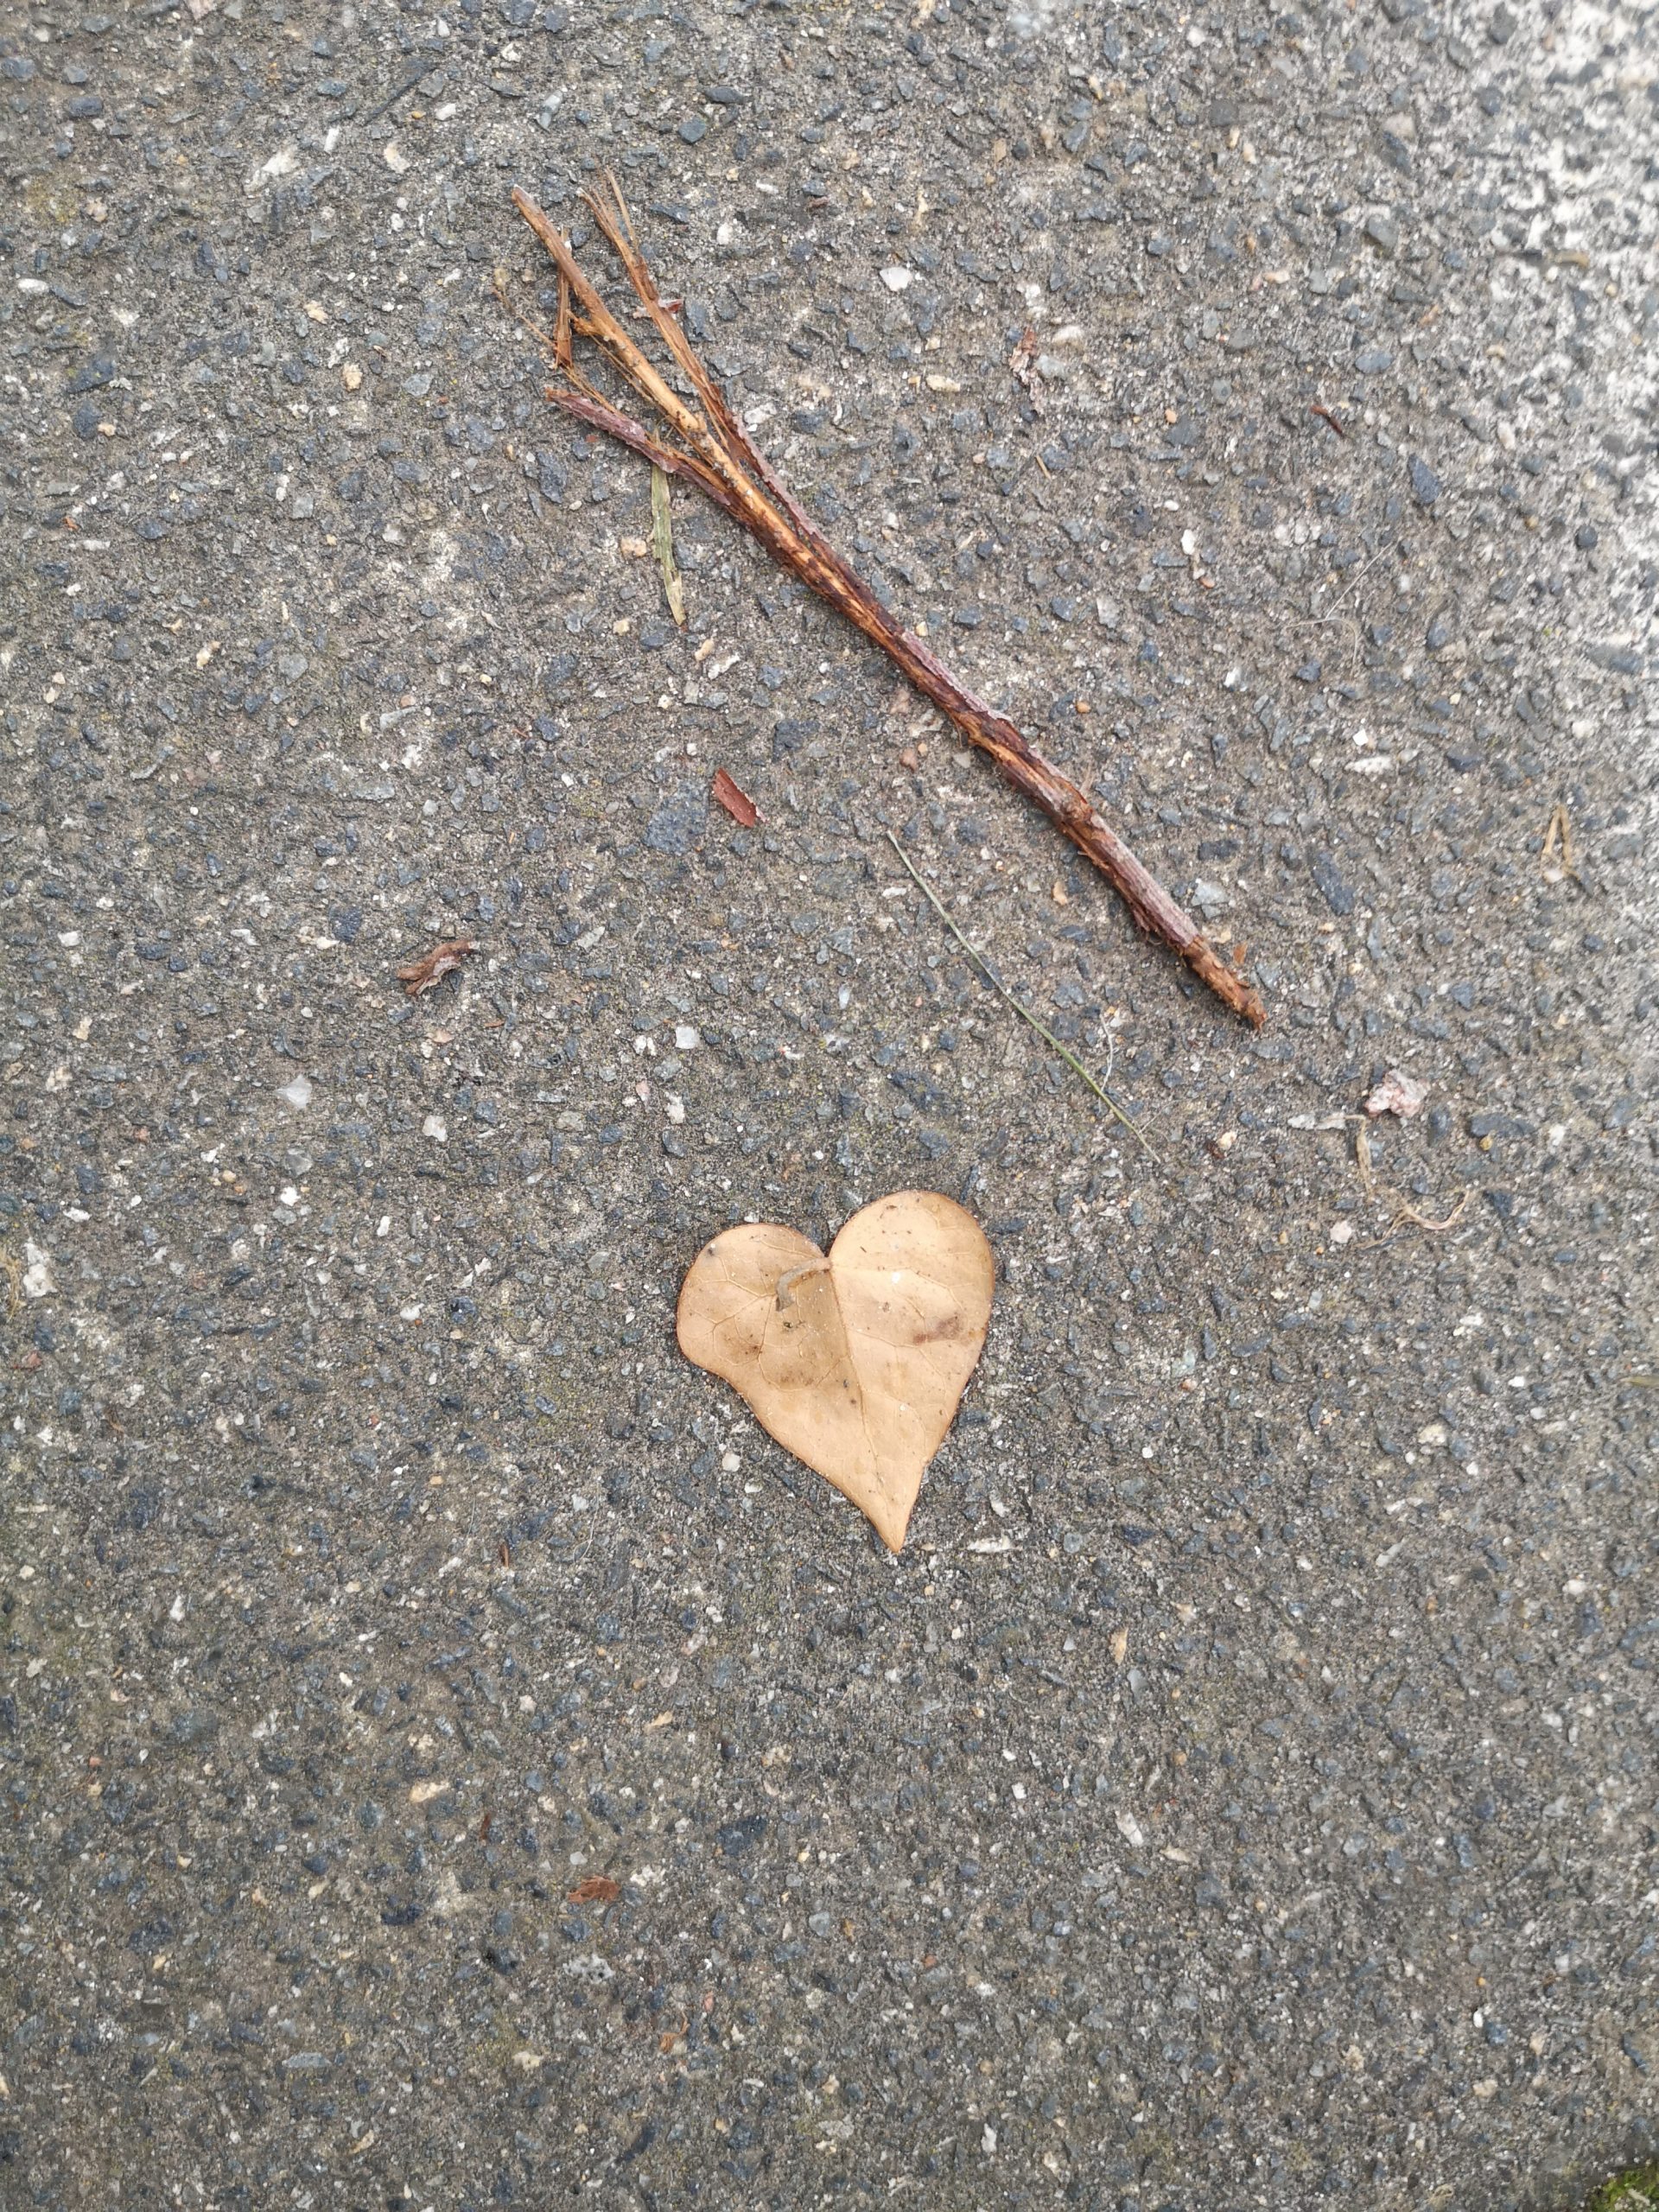 A stick with a leaf in the shape of a heart